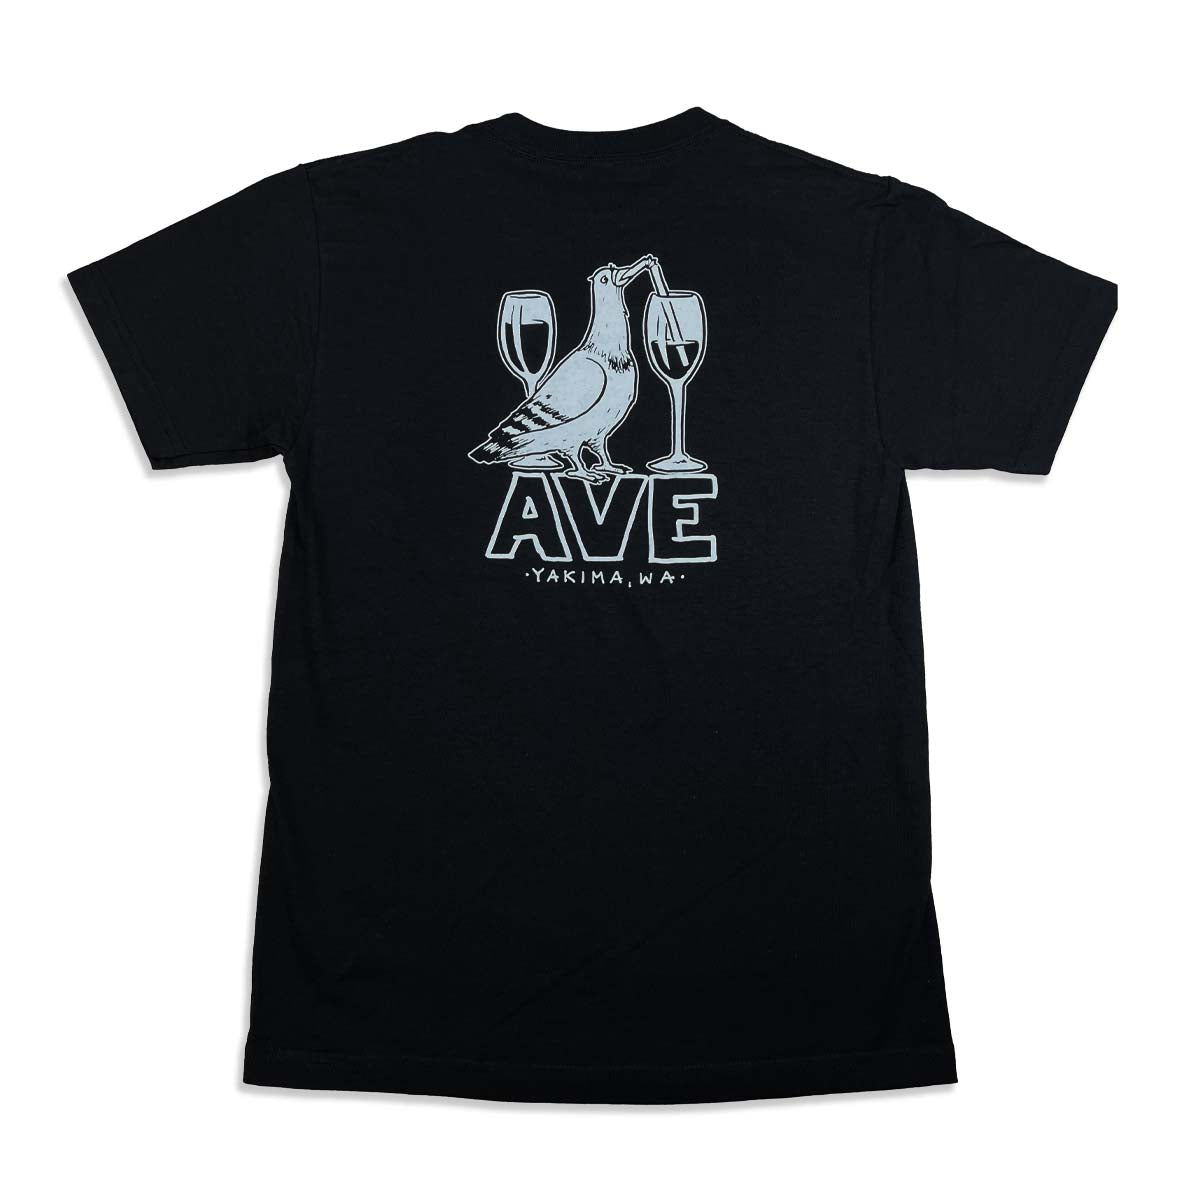 AVE x Todd Francis Thirsty Pigeon Short Sleeve T-Shirt - Apple Valley Emporium